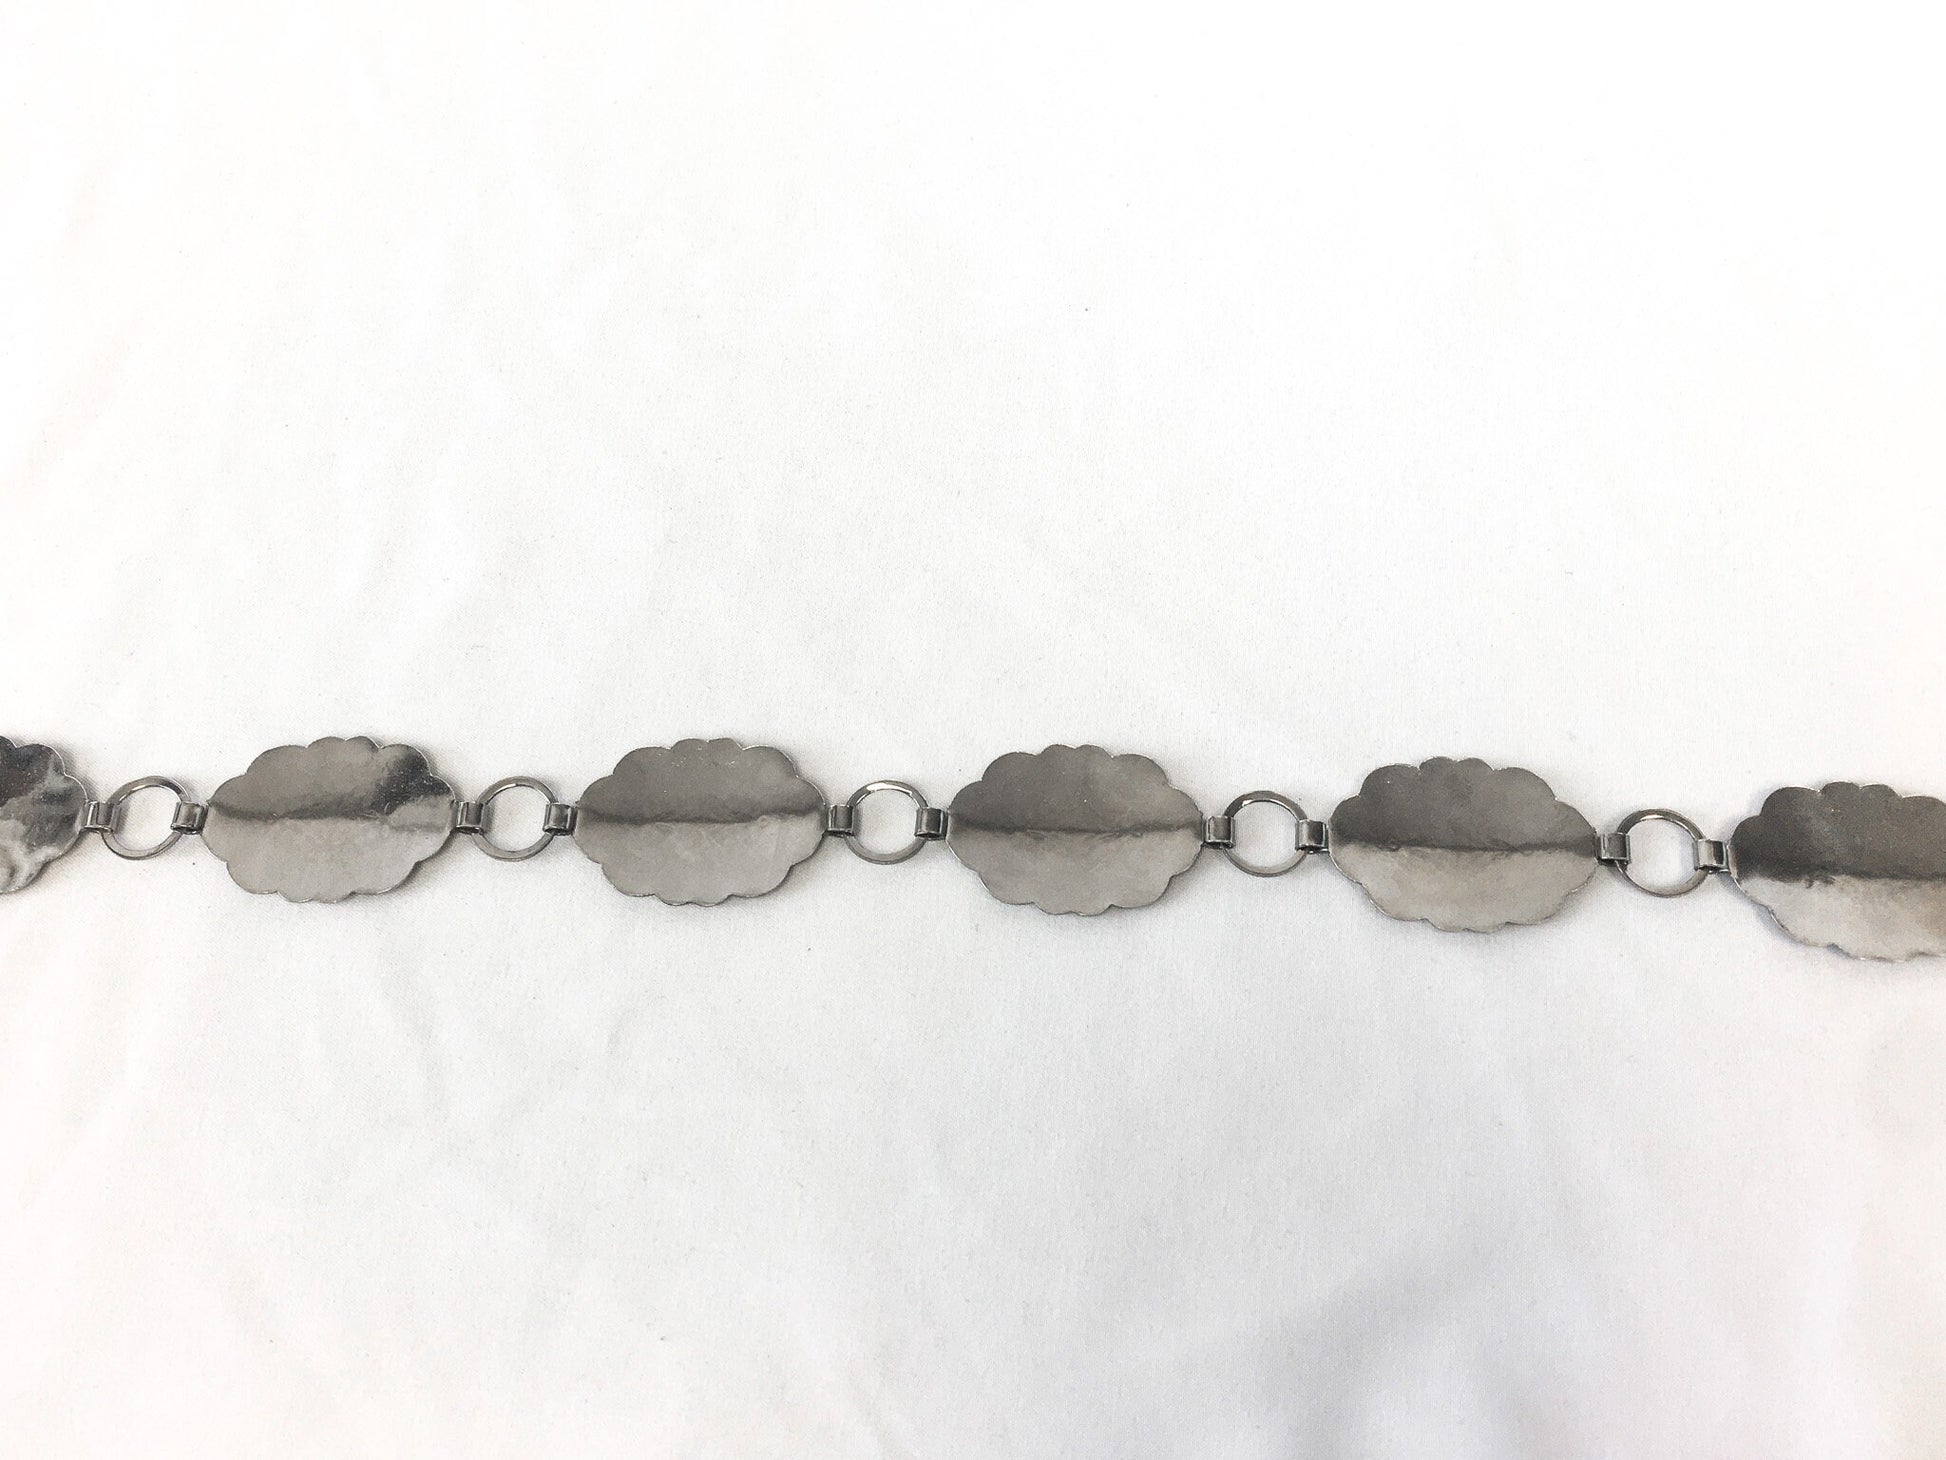 Vintage 60s/70s Silver Toned Concho Chain Link Belt with Engraving Detail, Vintage Boho Style Belt